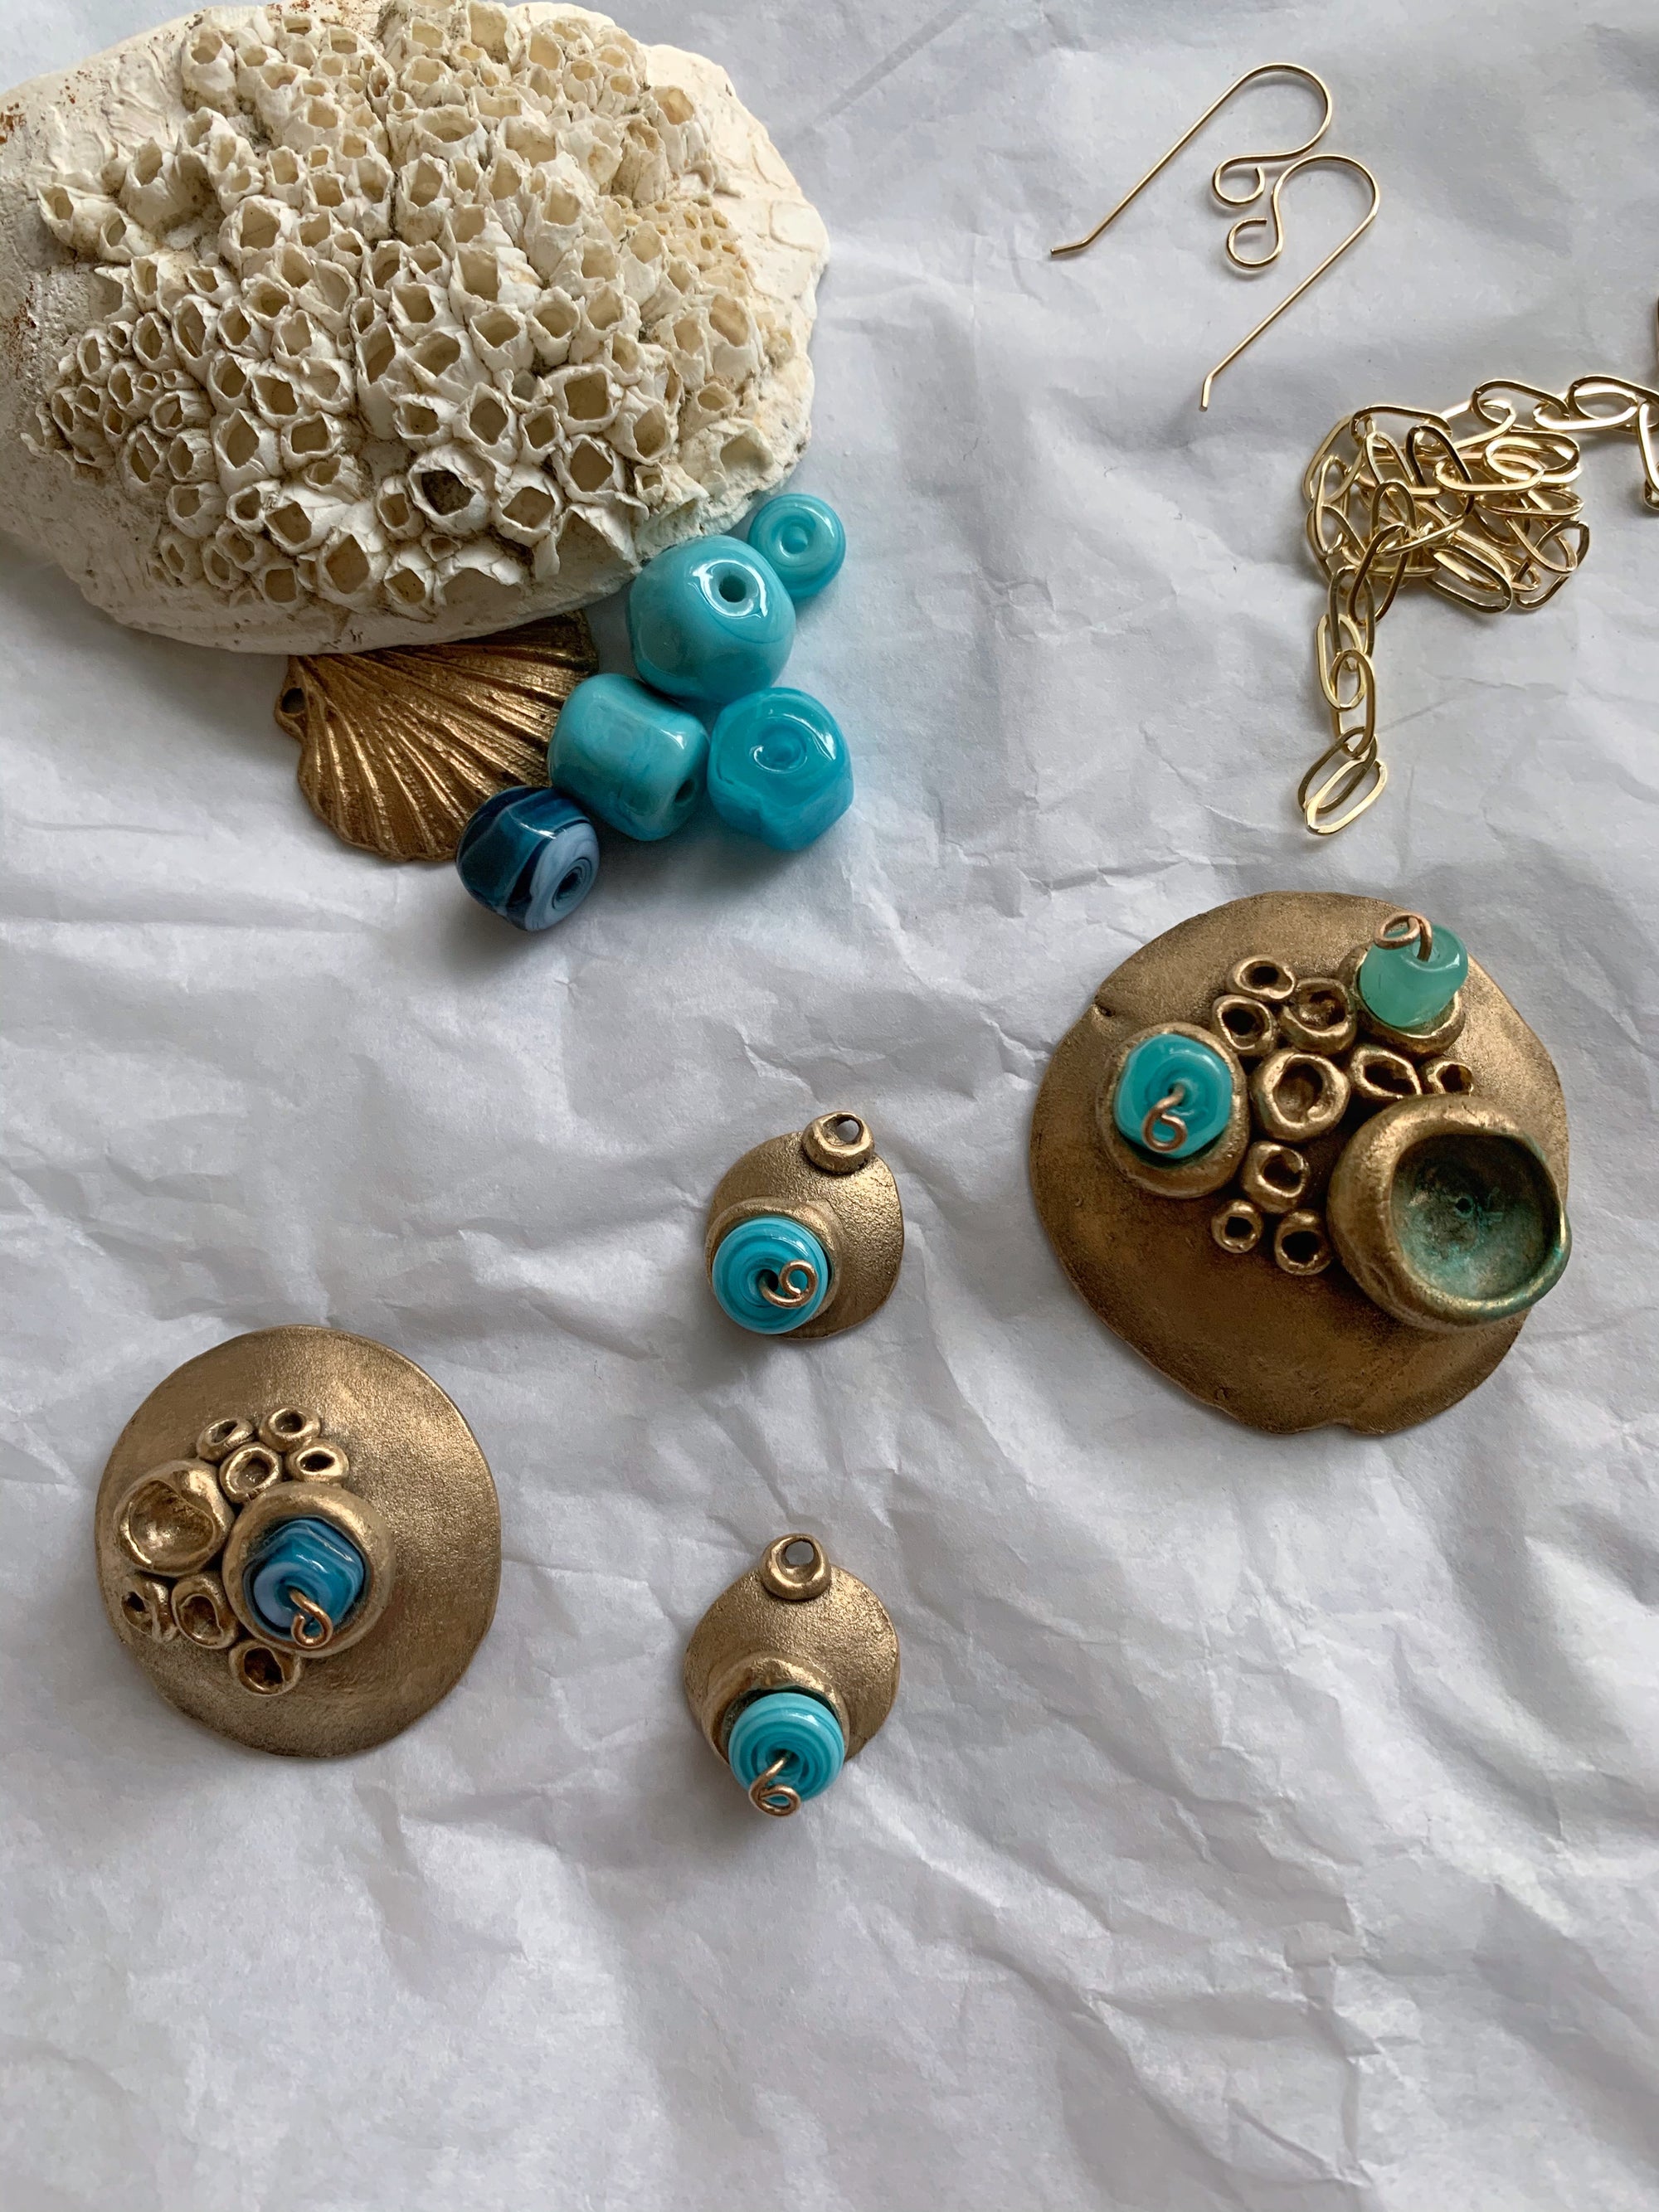 Barnacle blues, as jewelry!